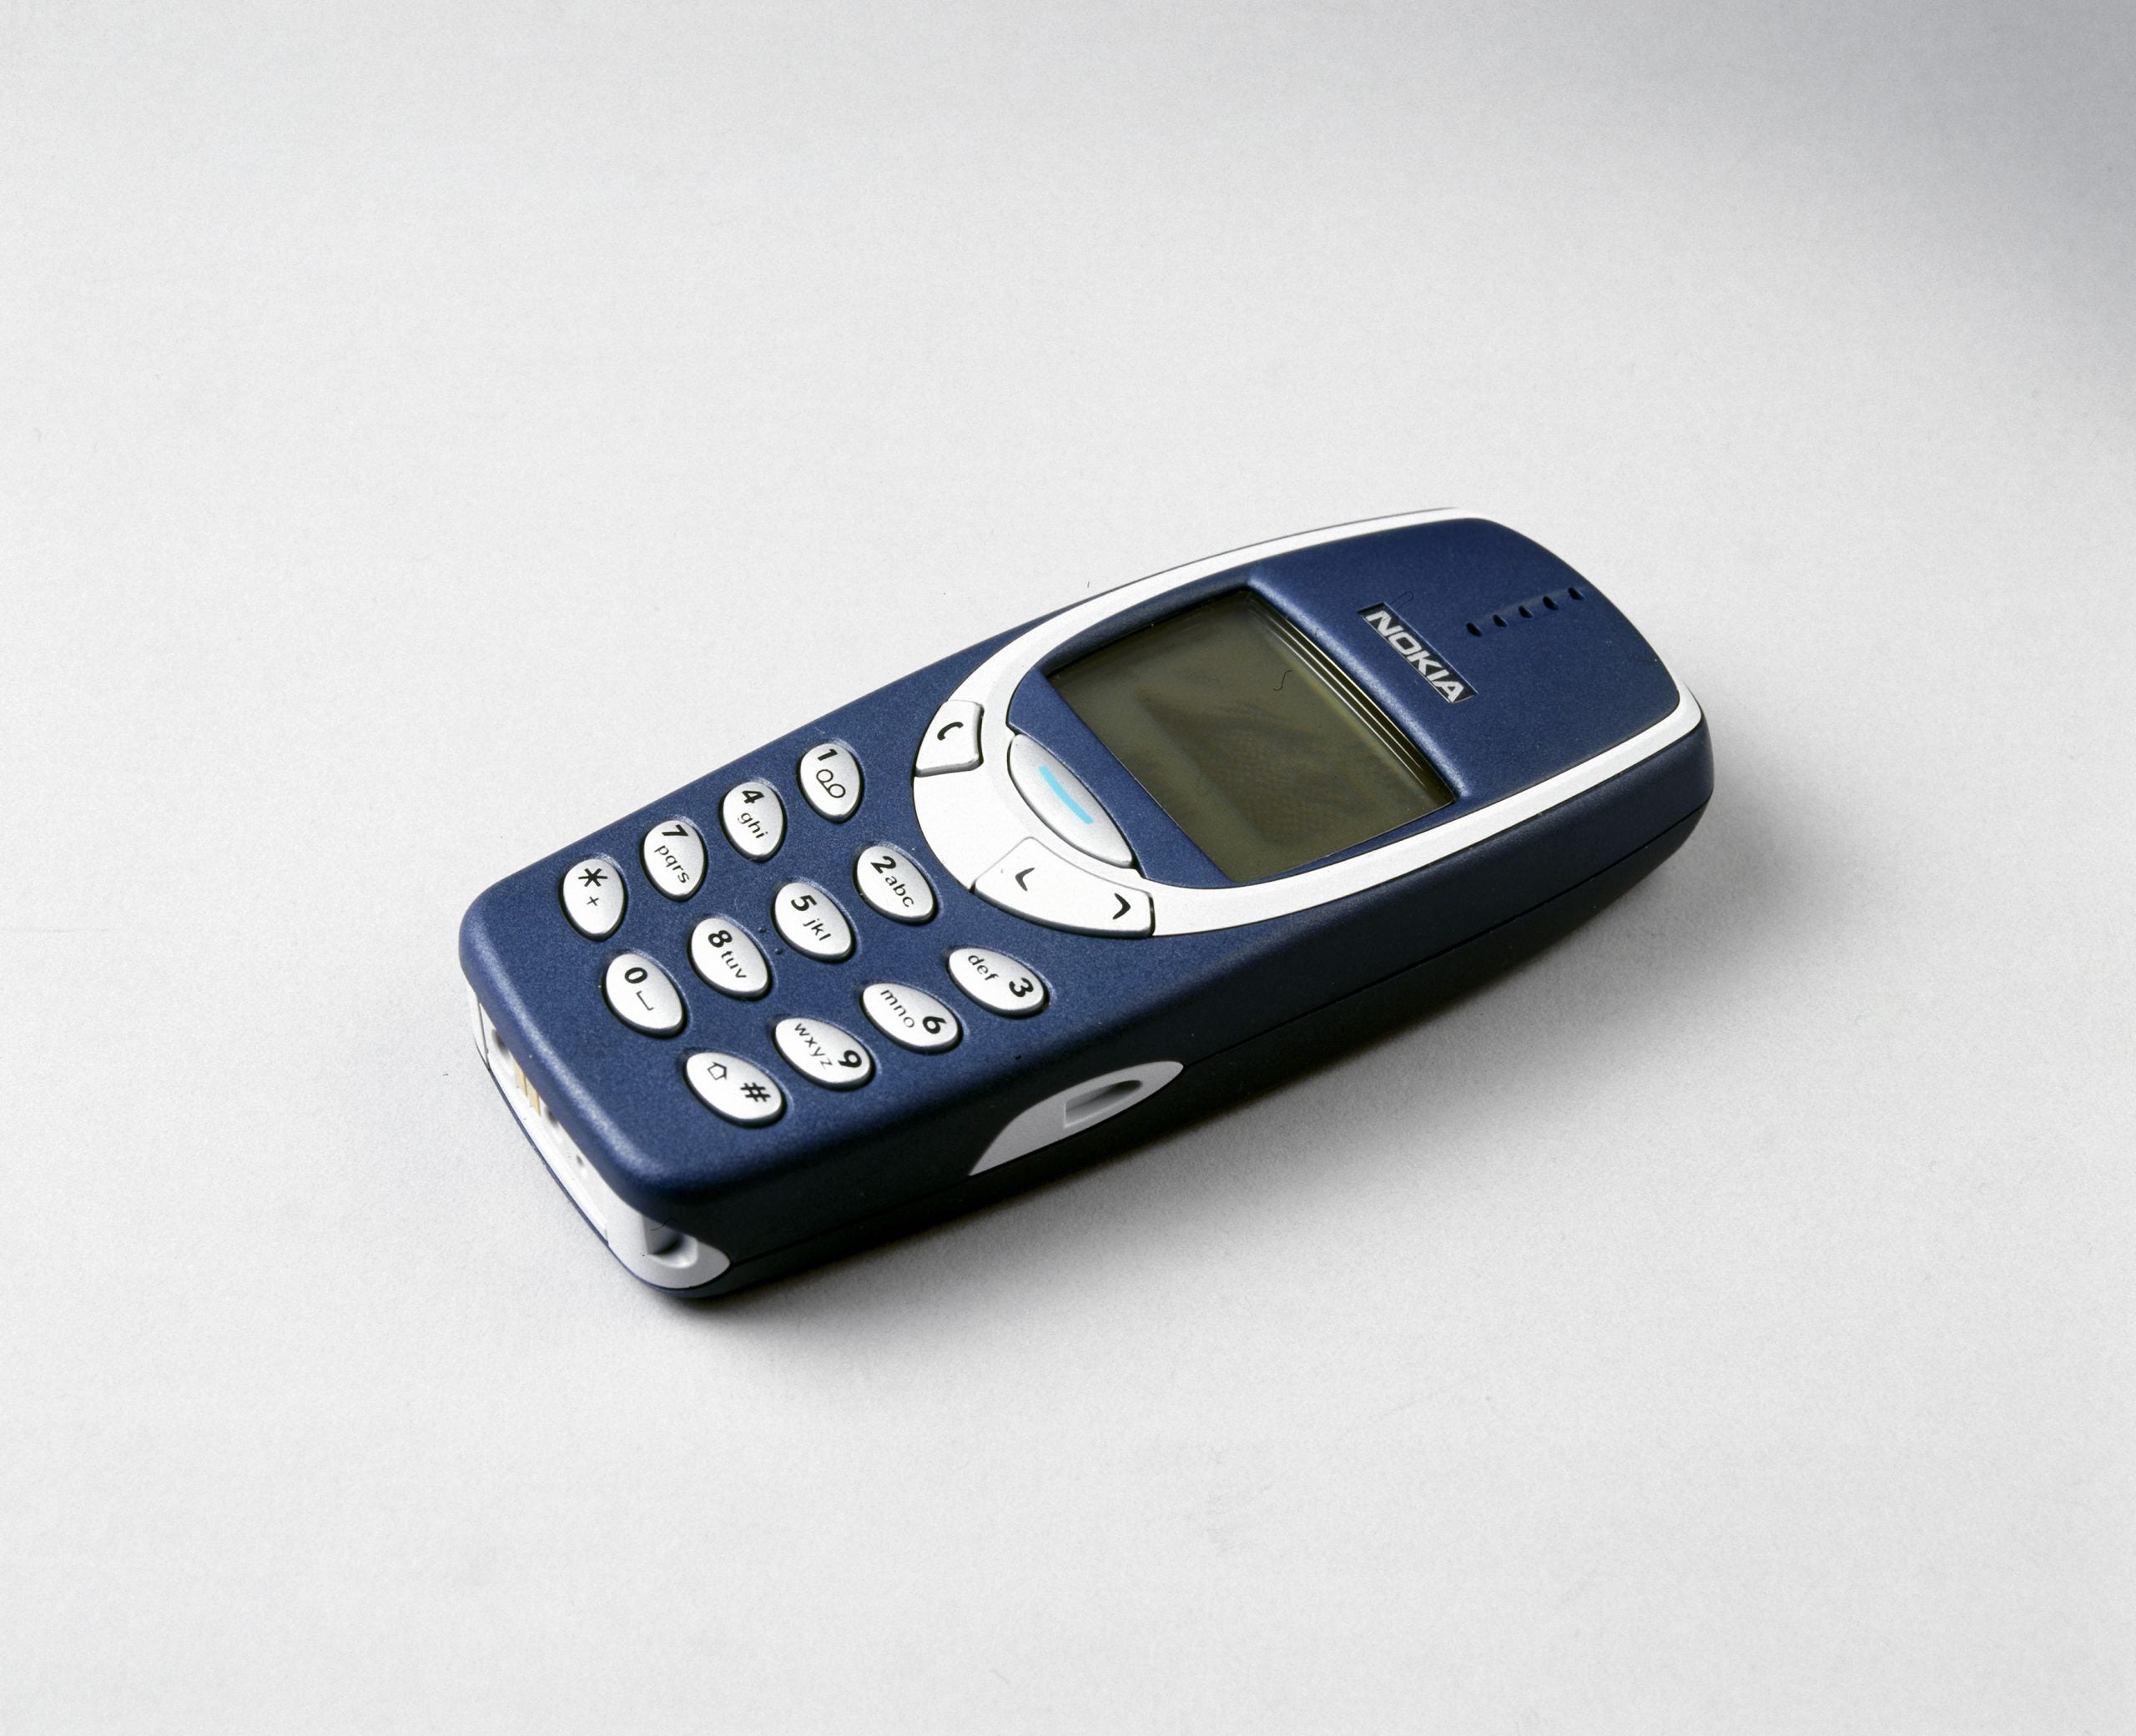 The Nokia Brick Phone Is Coming Back, And All The Millennials Rejoice